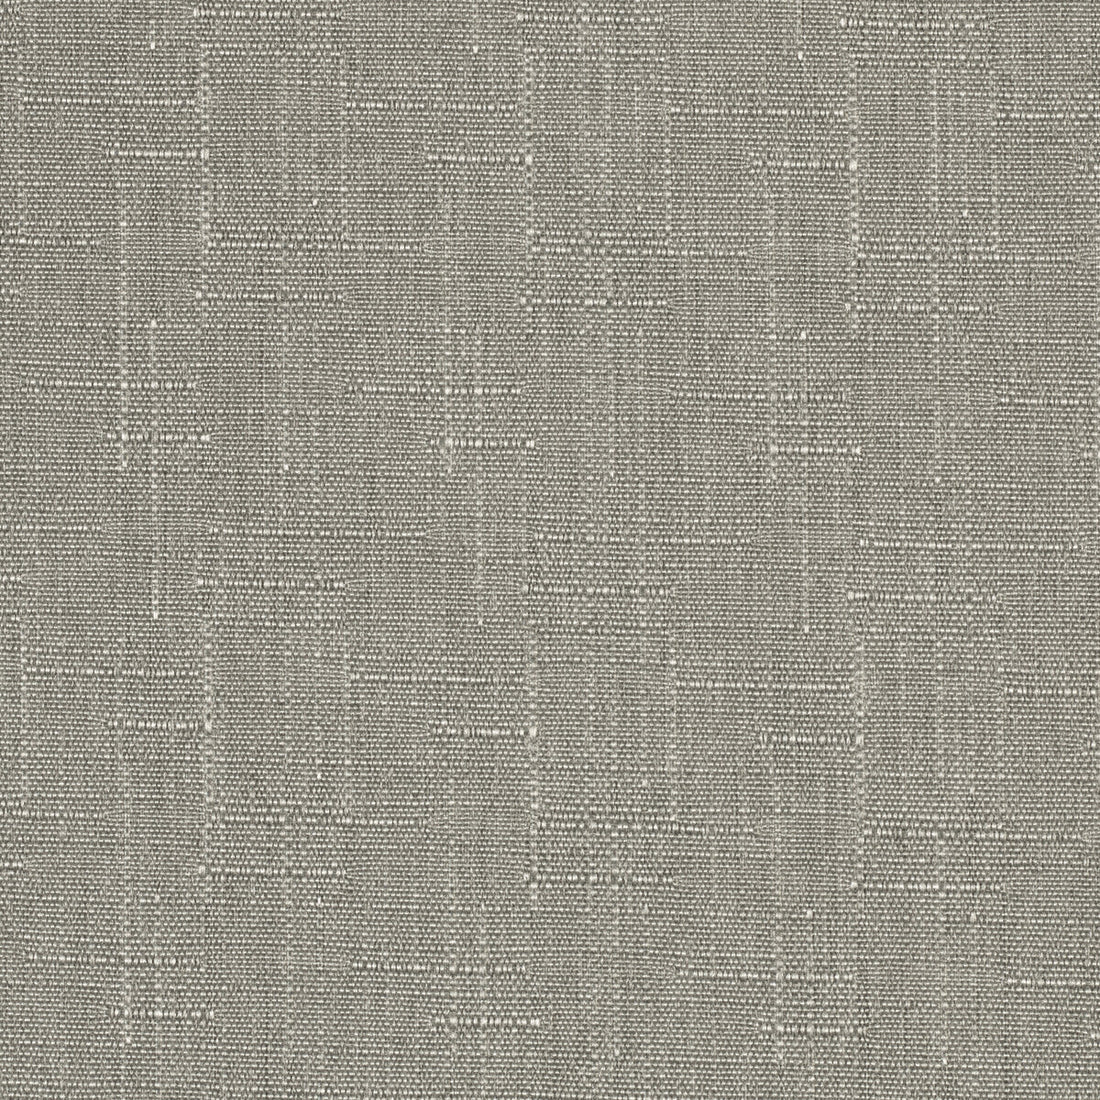 Kravet Contract fabric in 4317-11 color - pattern 4317.11.0 - by Kravet Contract